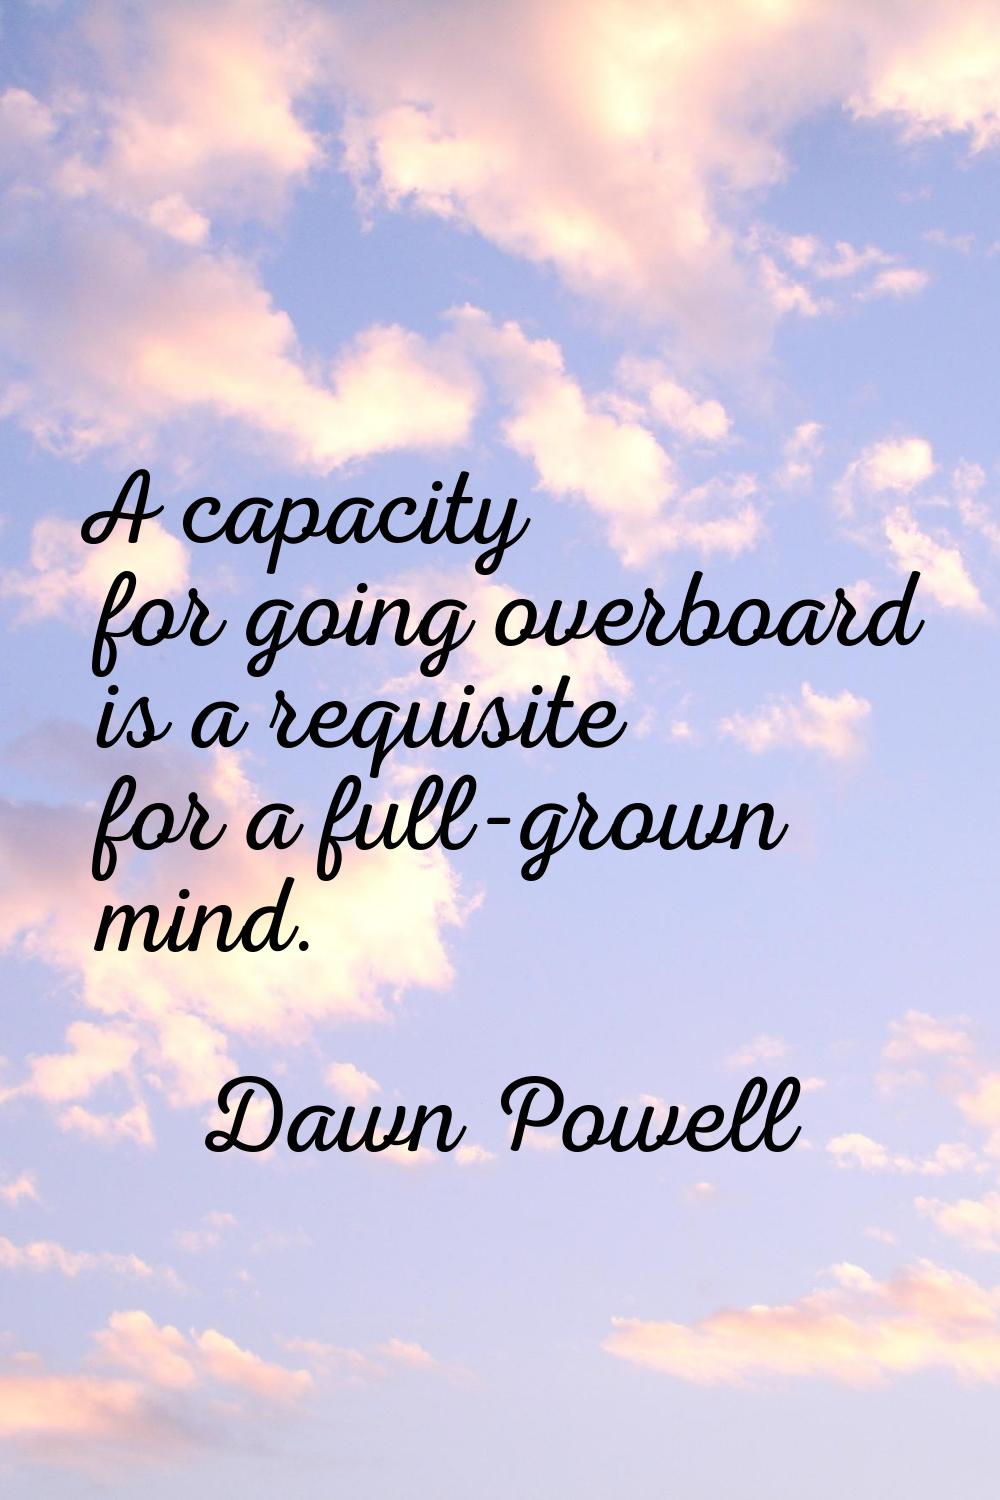 A capacity for going overboard is a requisite for a full-grown mind.